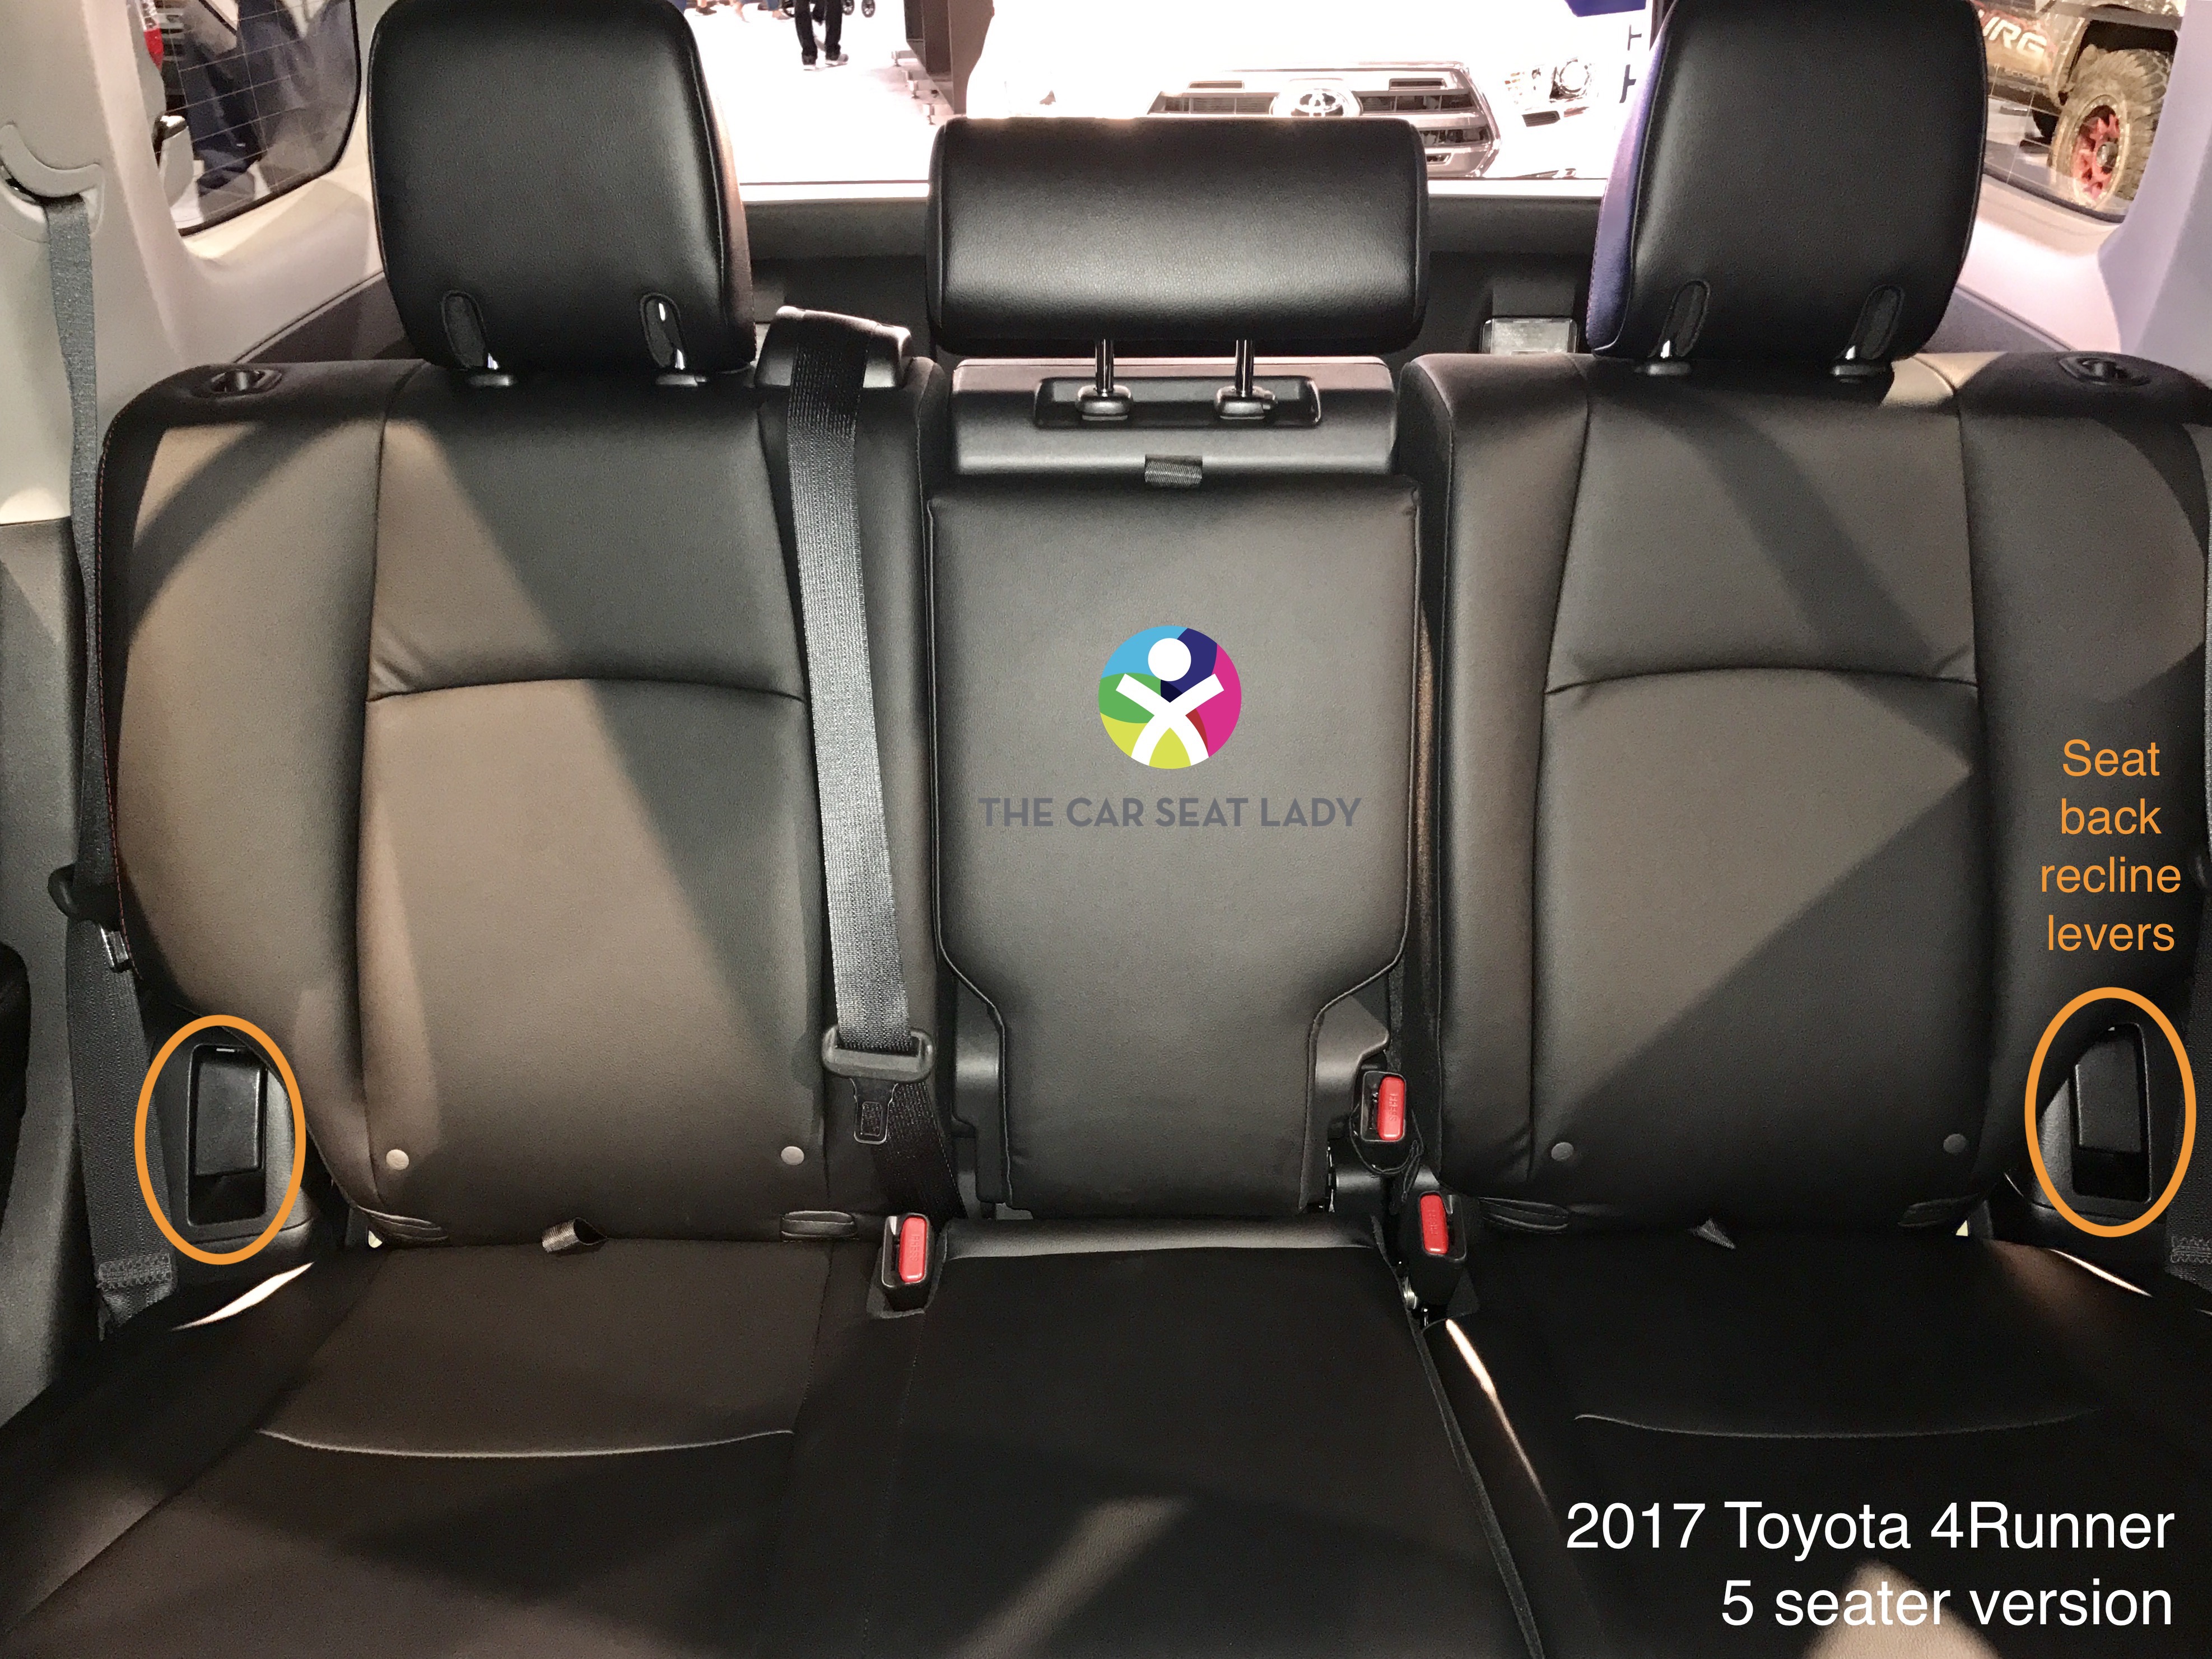 https://thecarseatlady.com/wp-content/uploads/2018/01/2017-Toyota-4Runner-2nd-row-5-seater-version-frontal.jpg